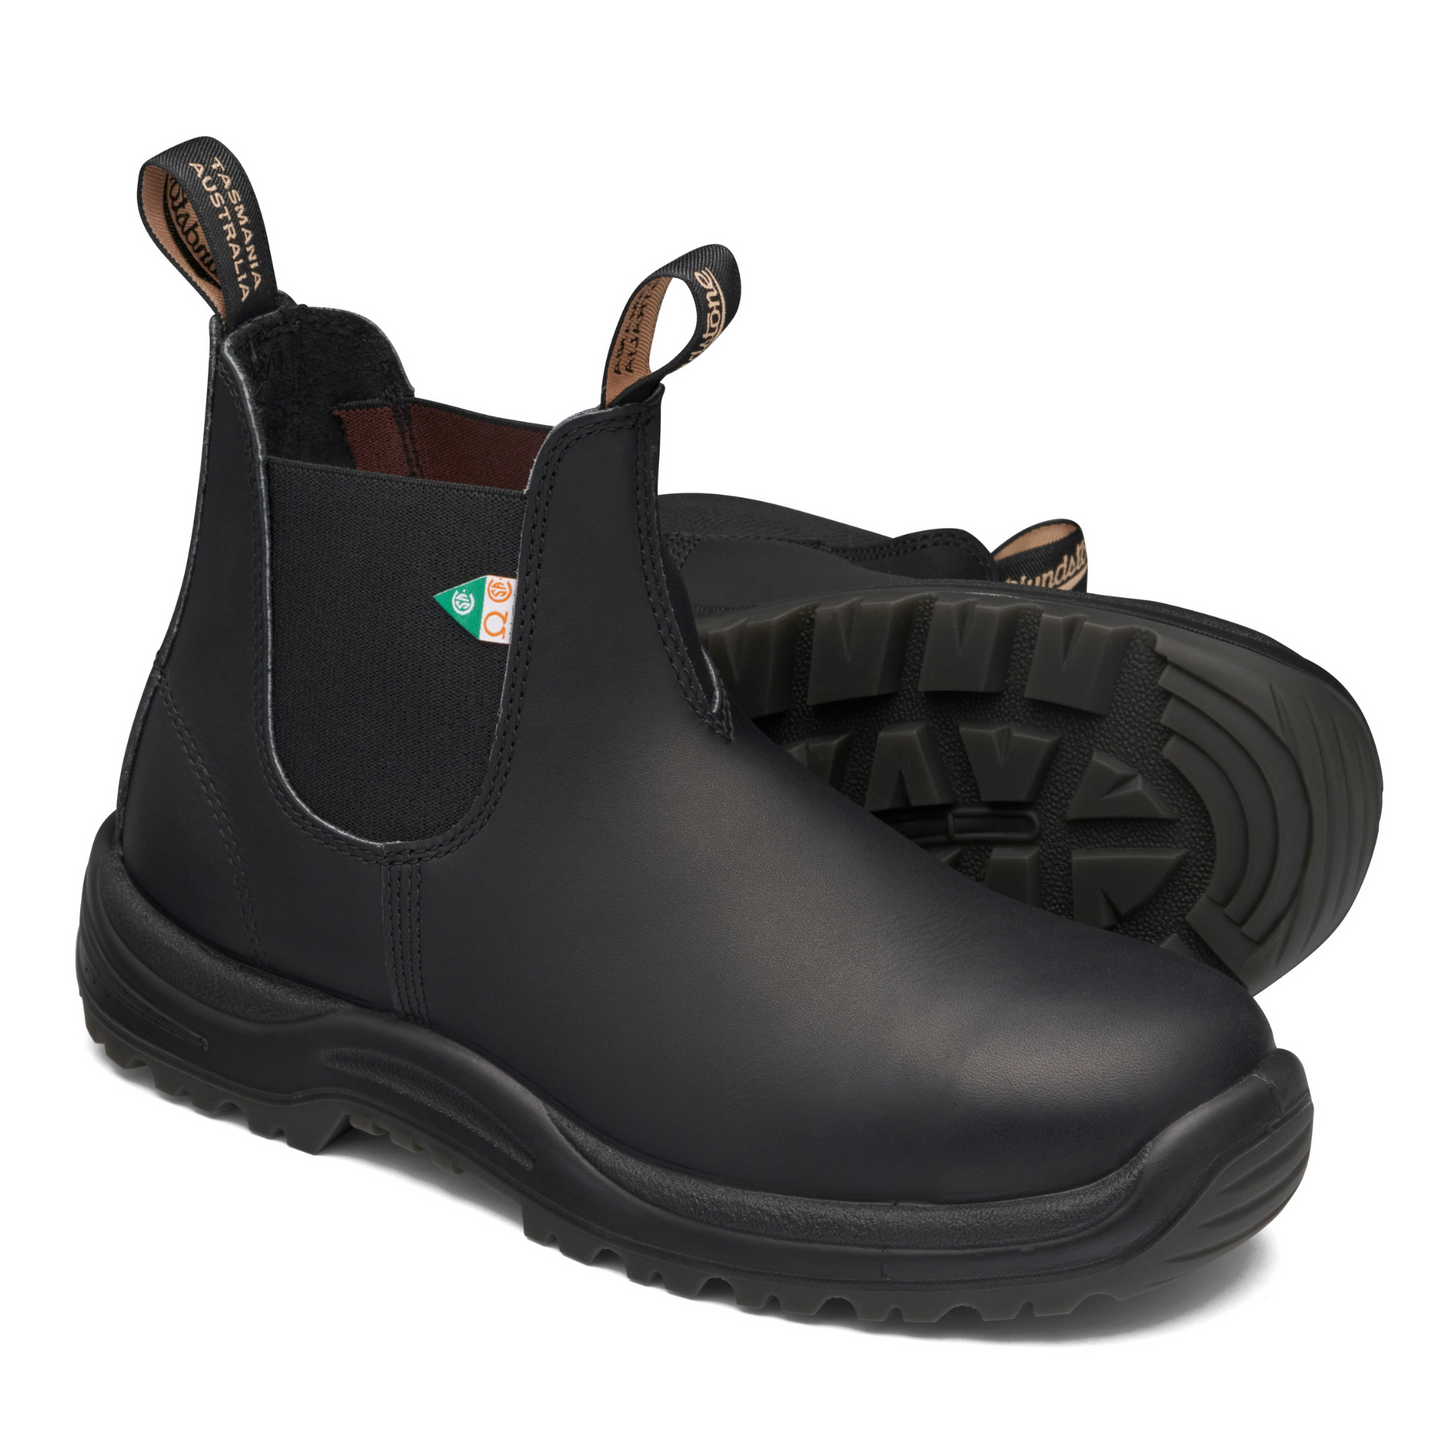 Pair of black boots with slip resistant, steel toe and black elastic sides.